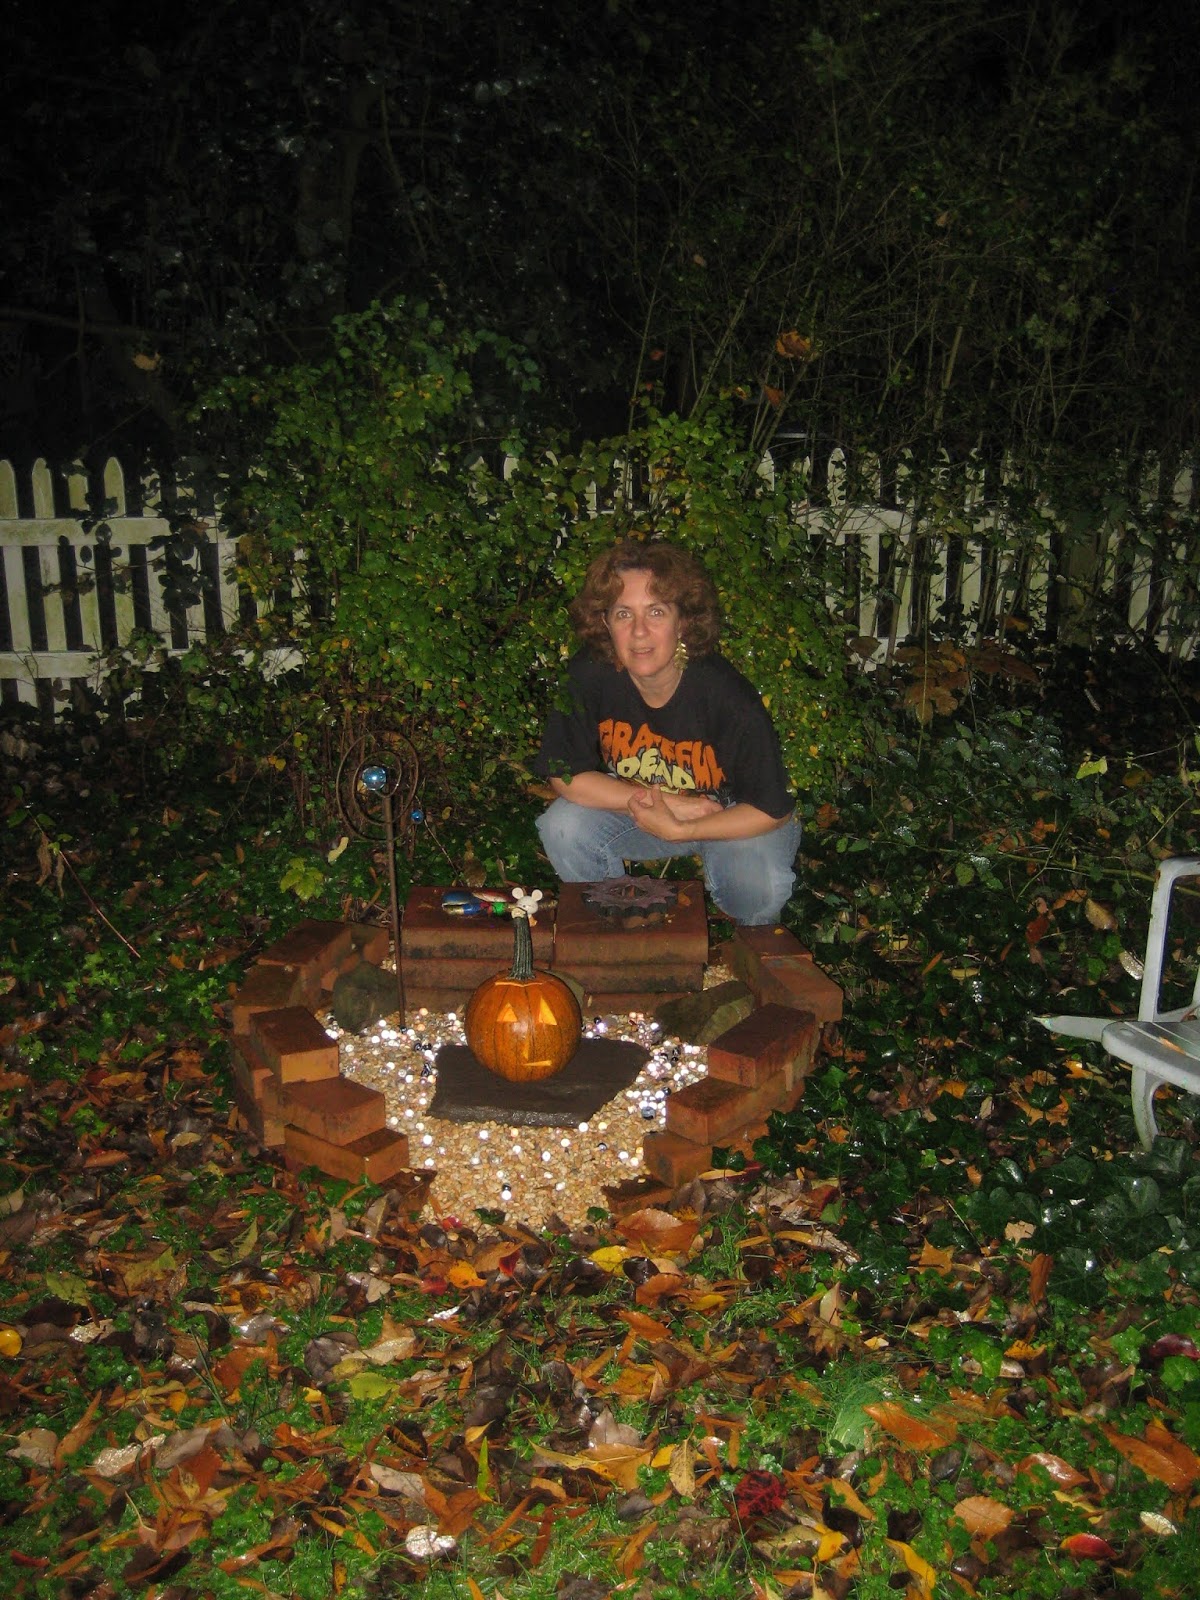 The Gods Are Bored: How To Build an Outdoor Pagan Shrine